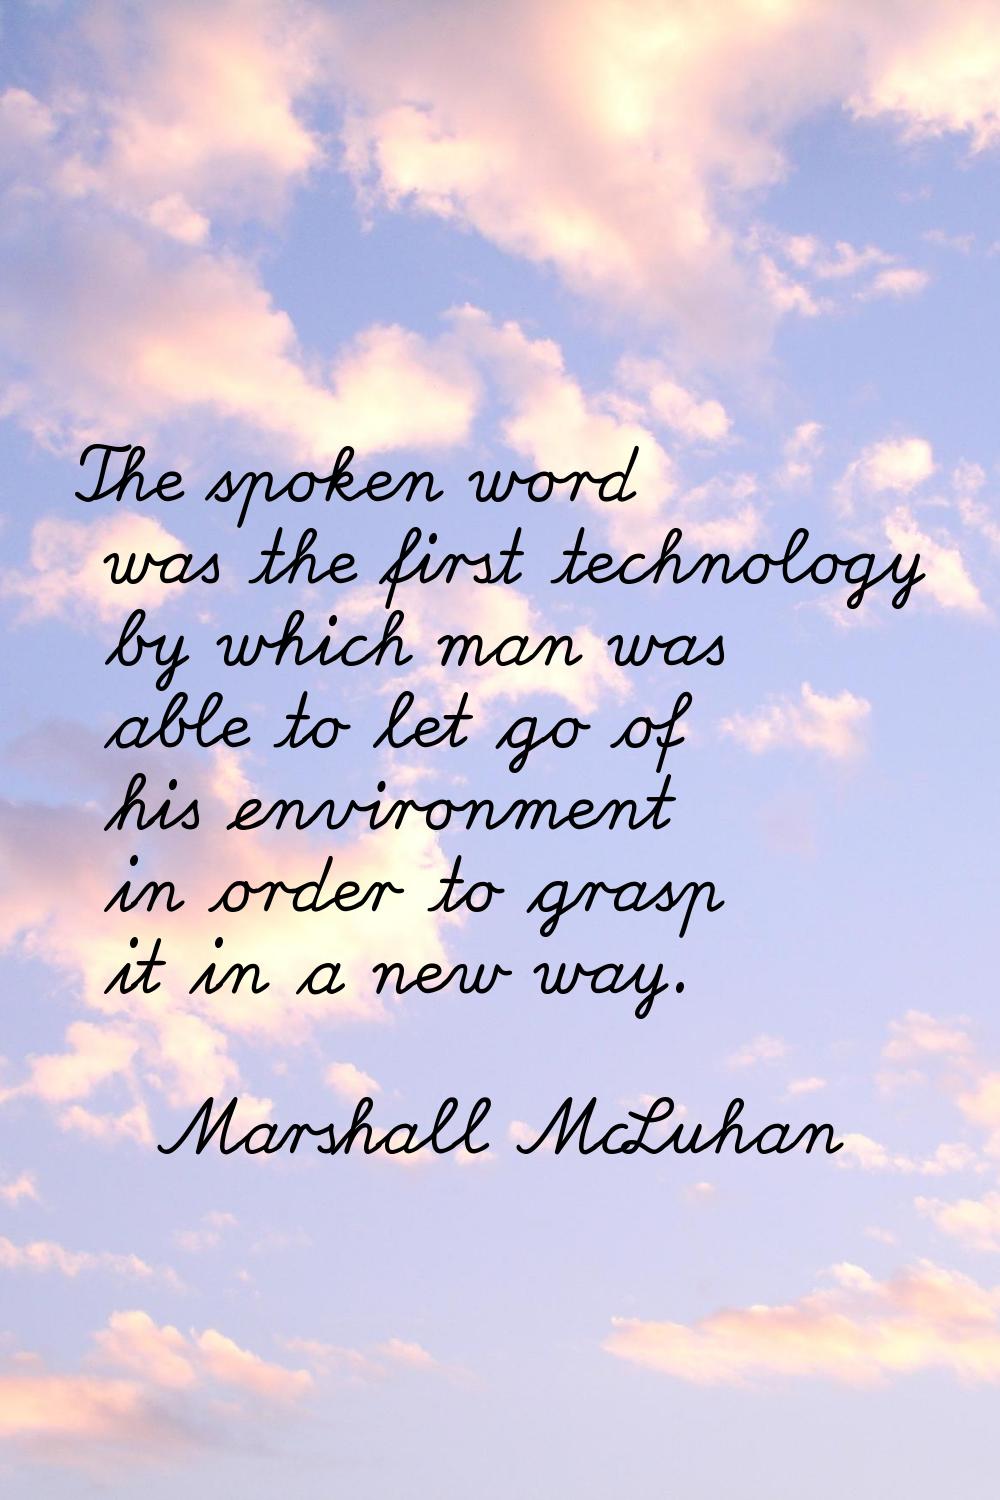 The spoken word was the first technology by which man was able to let go of his environment in orde